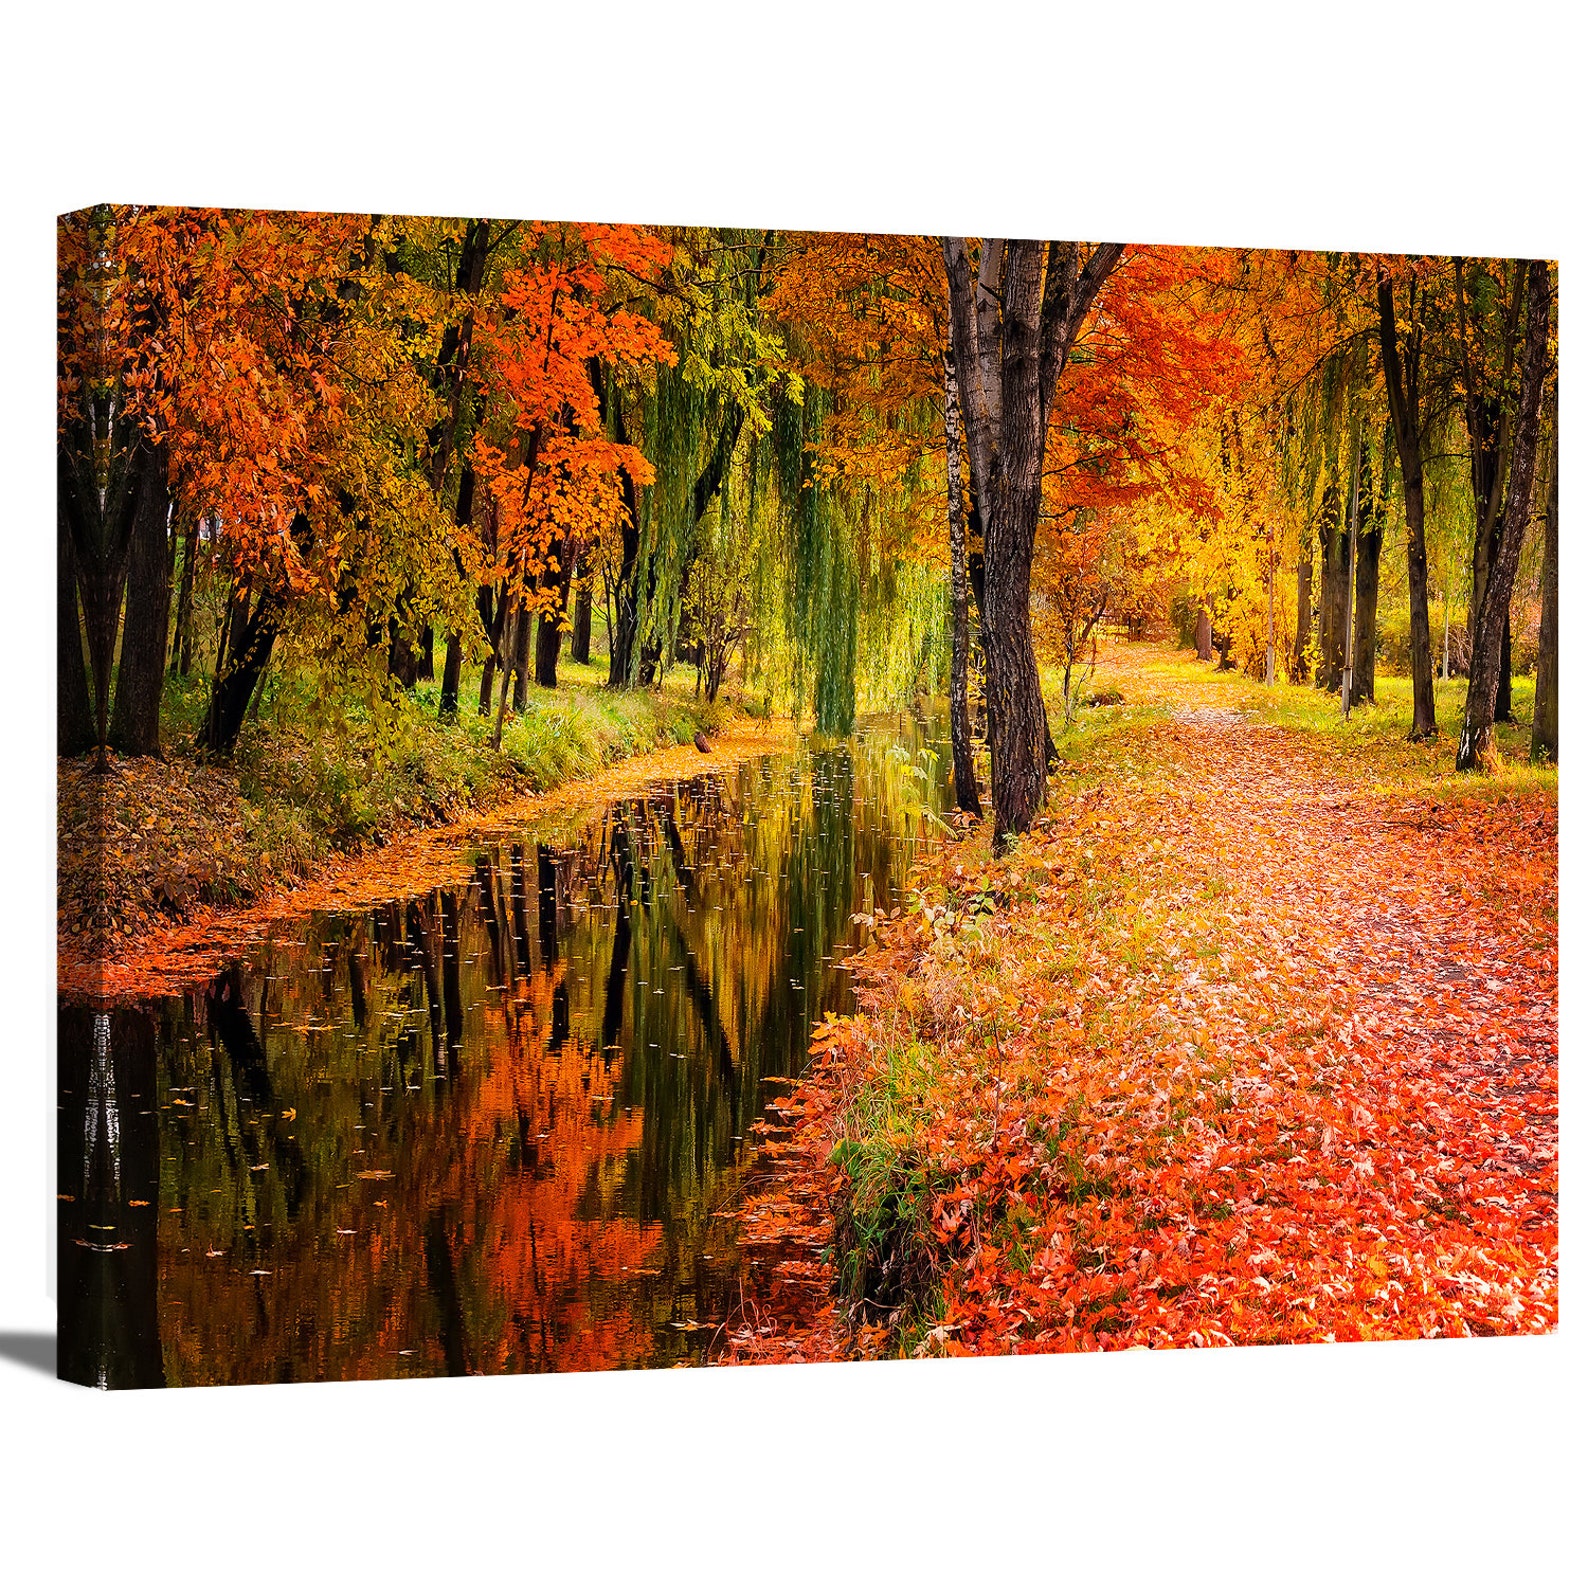 Autumn Landscape Beautiful Colored Trees Over the River - Etsy